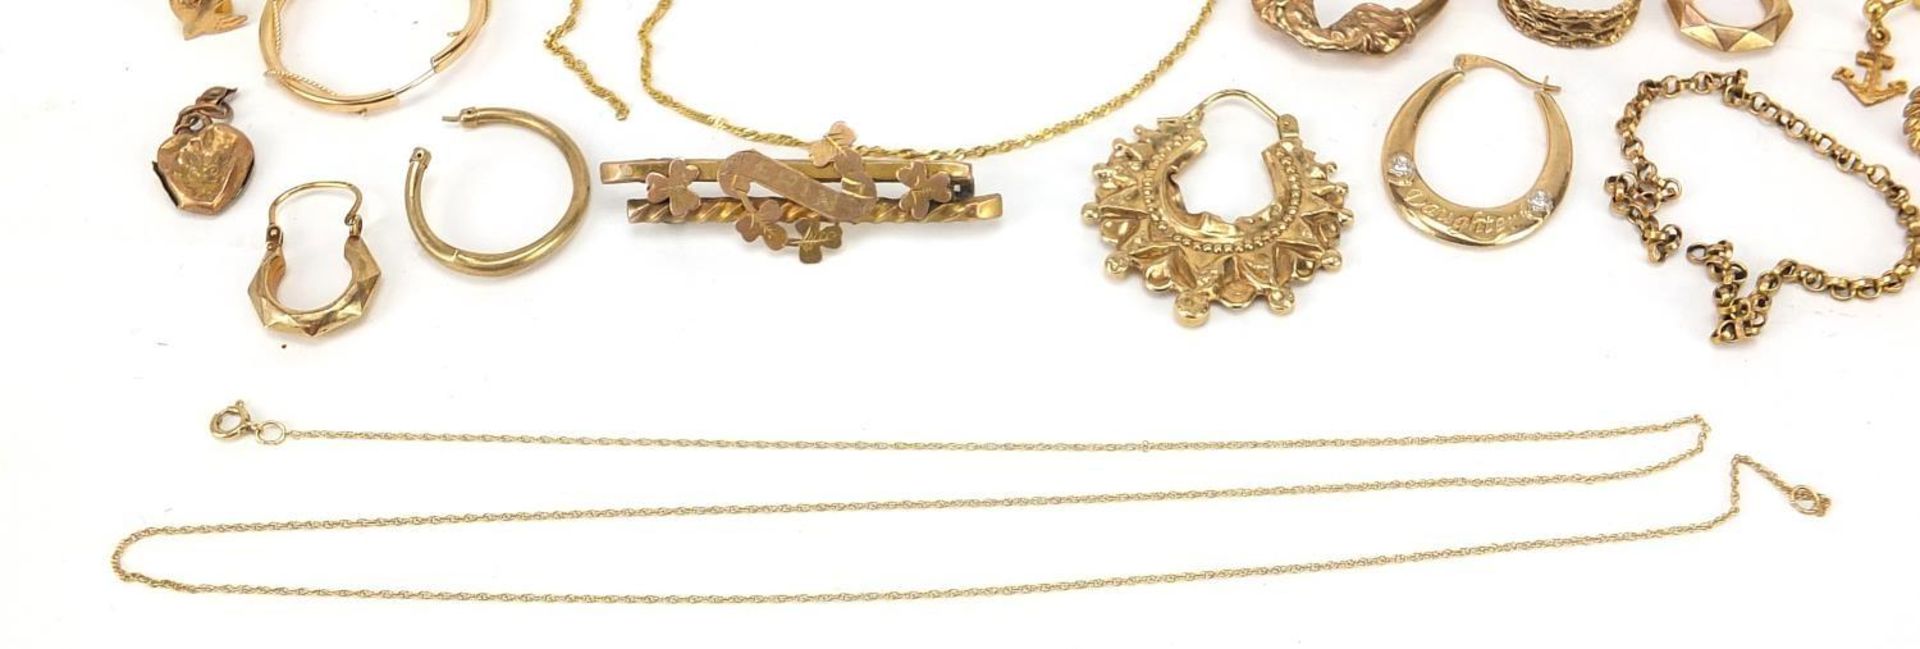 9ct gold jewellery including earrings, necklaces, Victorian bar brooch and 14ct gold fountain pen - Image 5 of 9